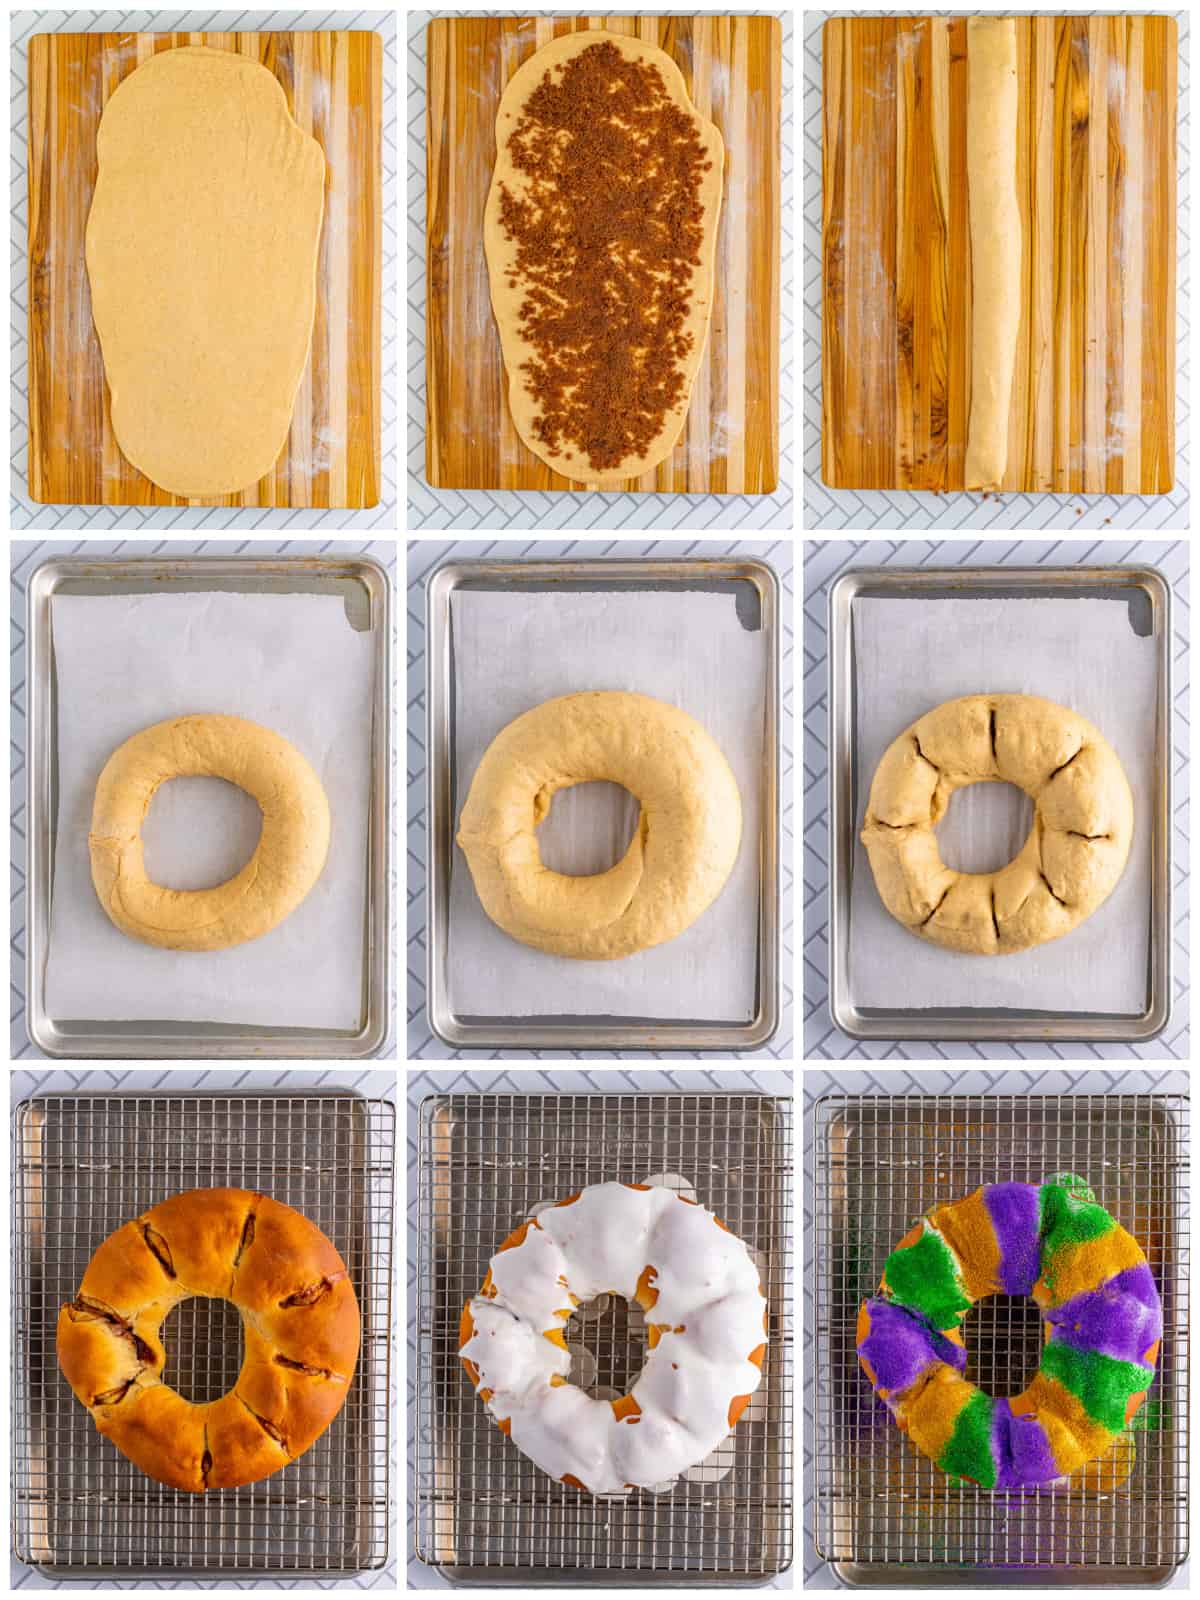 Step by step photos on how to make a King Cake Recipe.